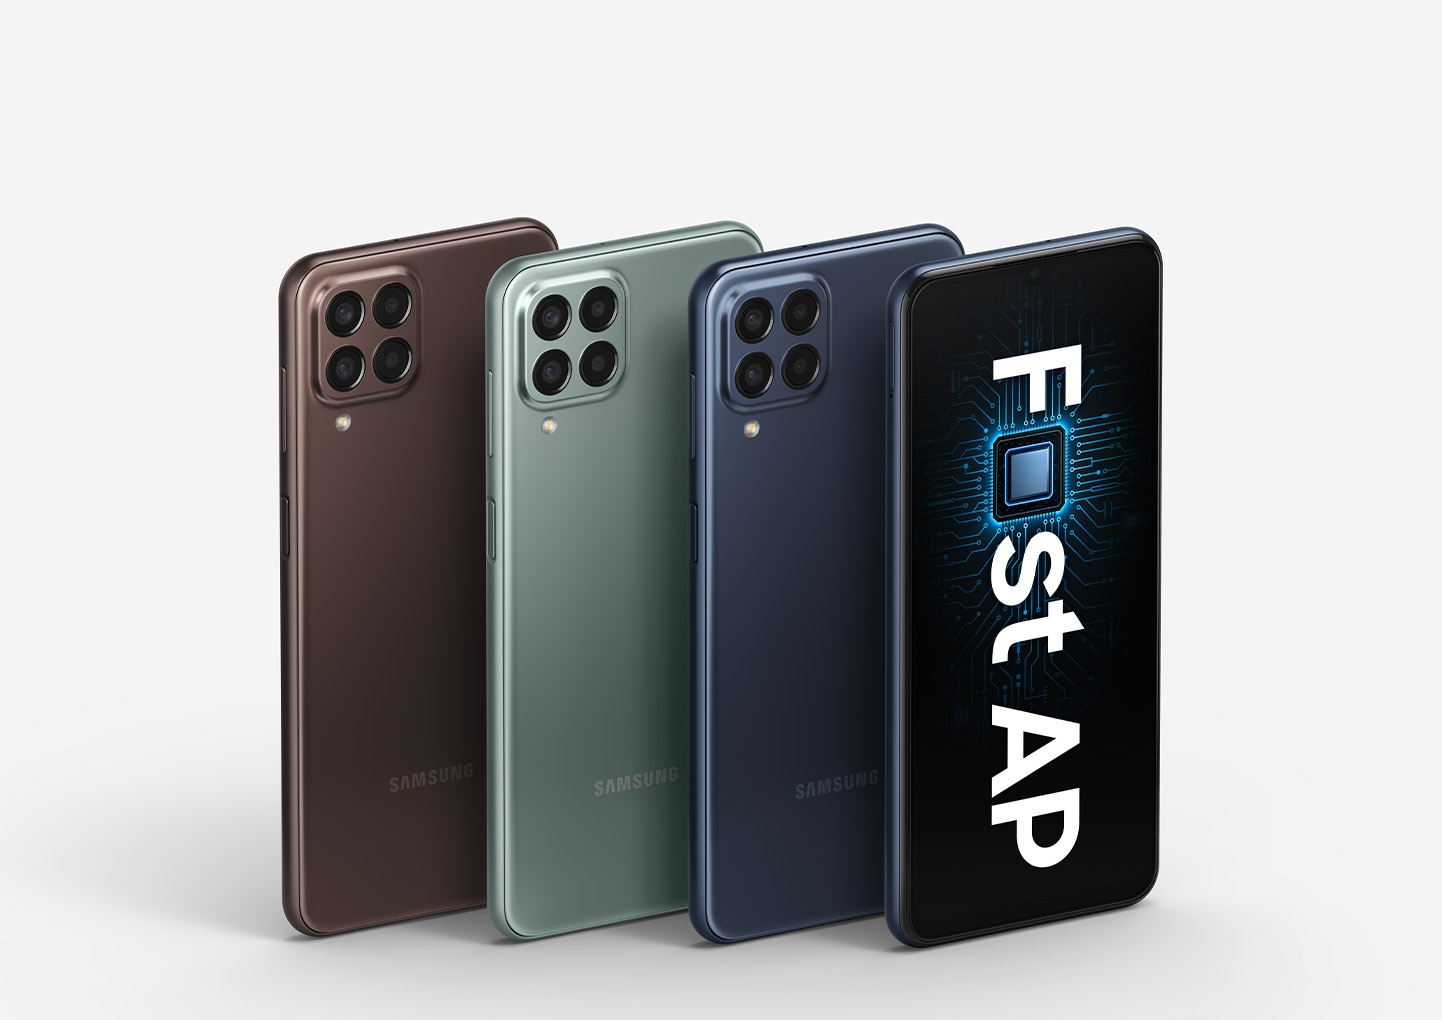 Four Galaxy M33 5G devices are shown with three of them showing the backside to display the Brown, Green and Blue colorways. The only front-facing device, located on the right edge, shows text that reads Fast AP with the a in Fast replaced with a processing chip.